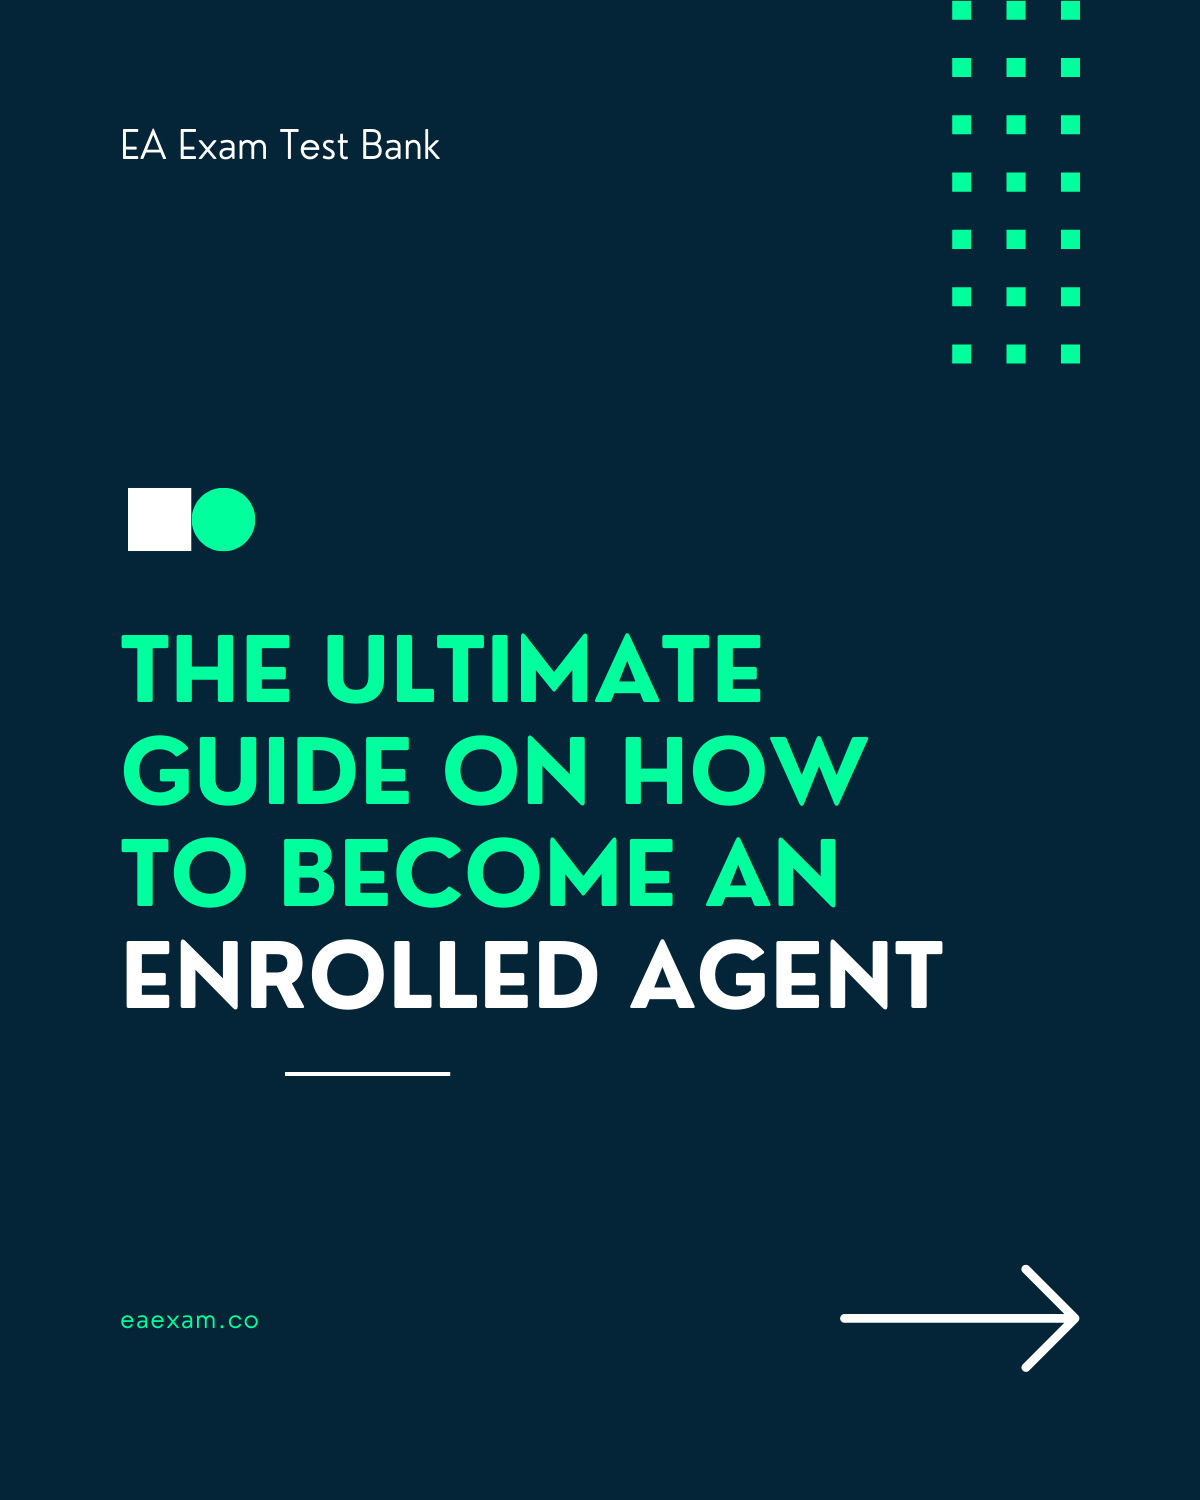 The Ultimate Guide on How to Become an Enrolled Agent